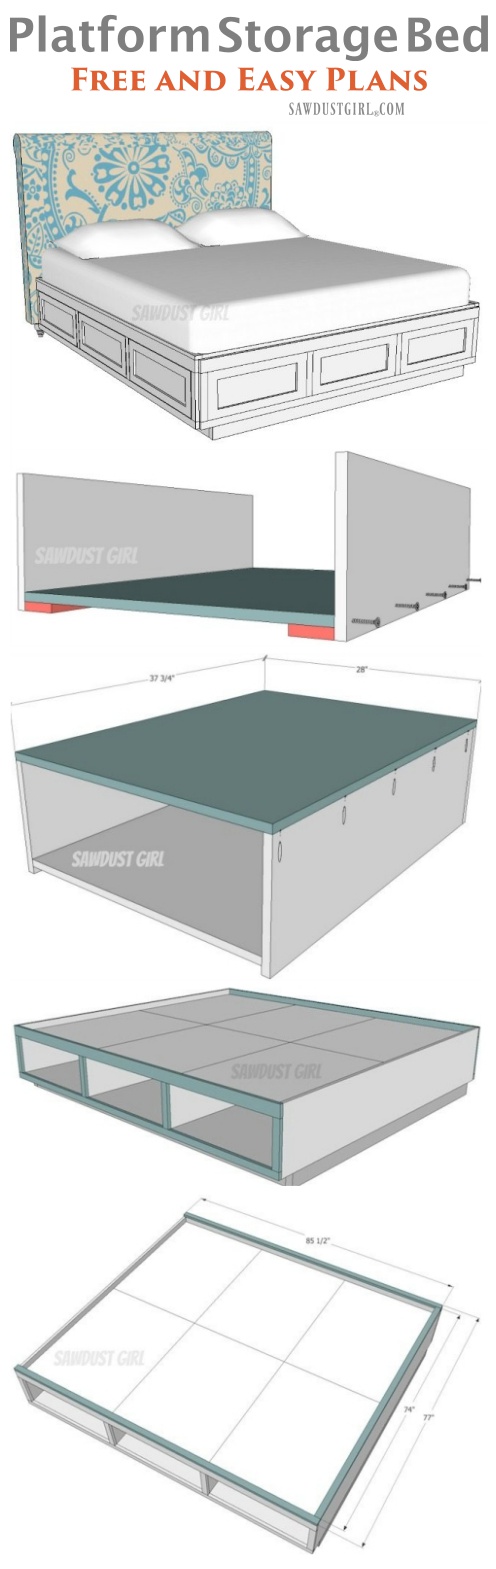 Build a platform storage bed with free plans!